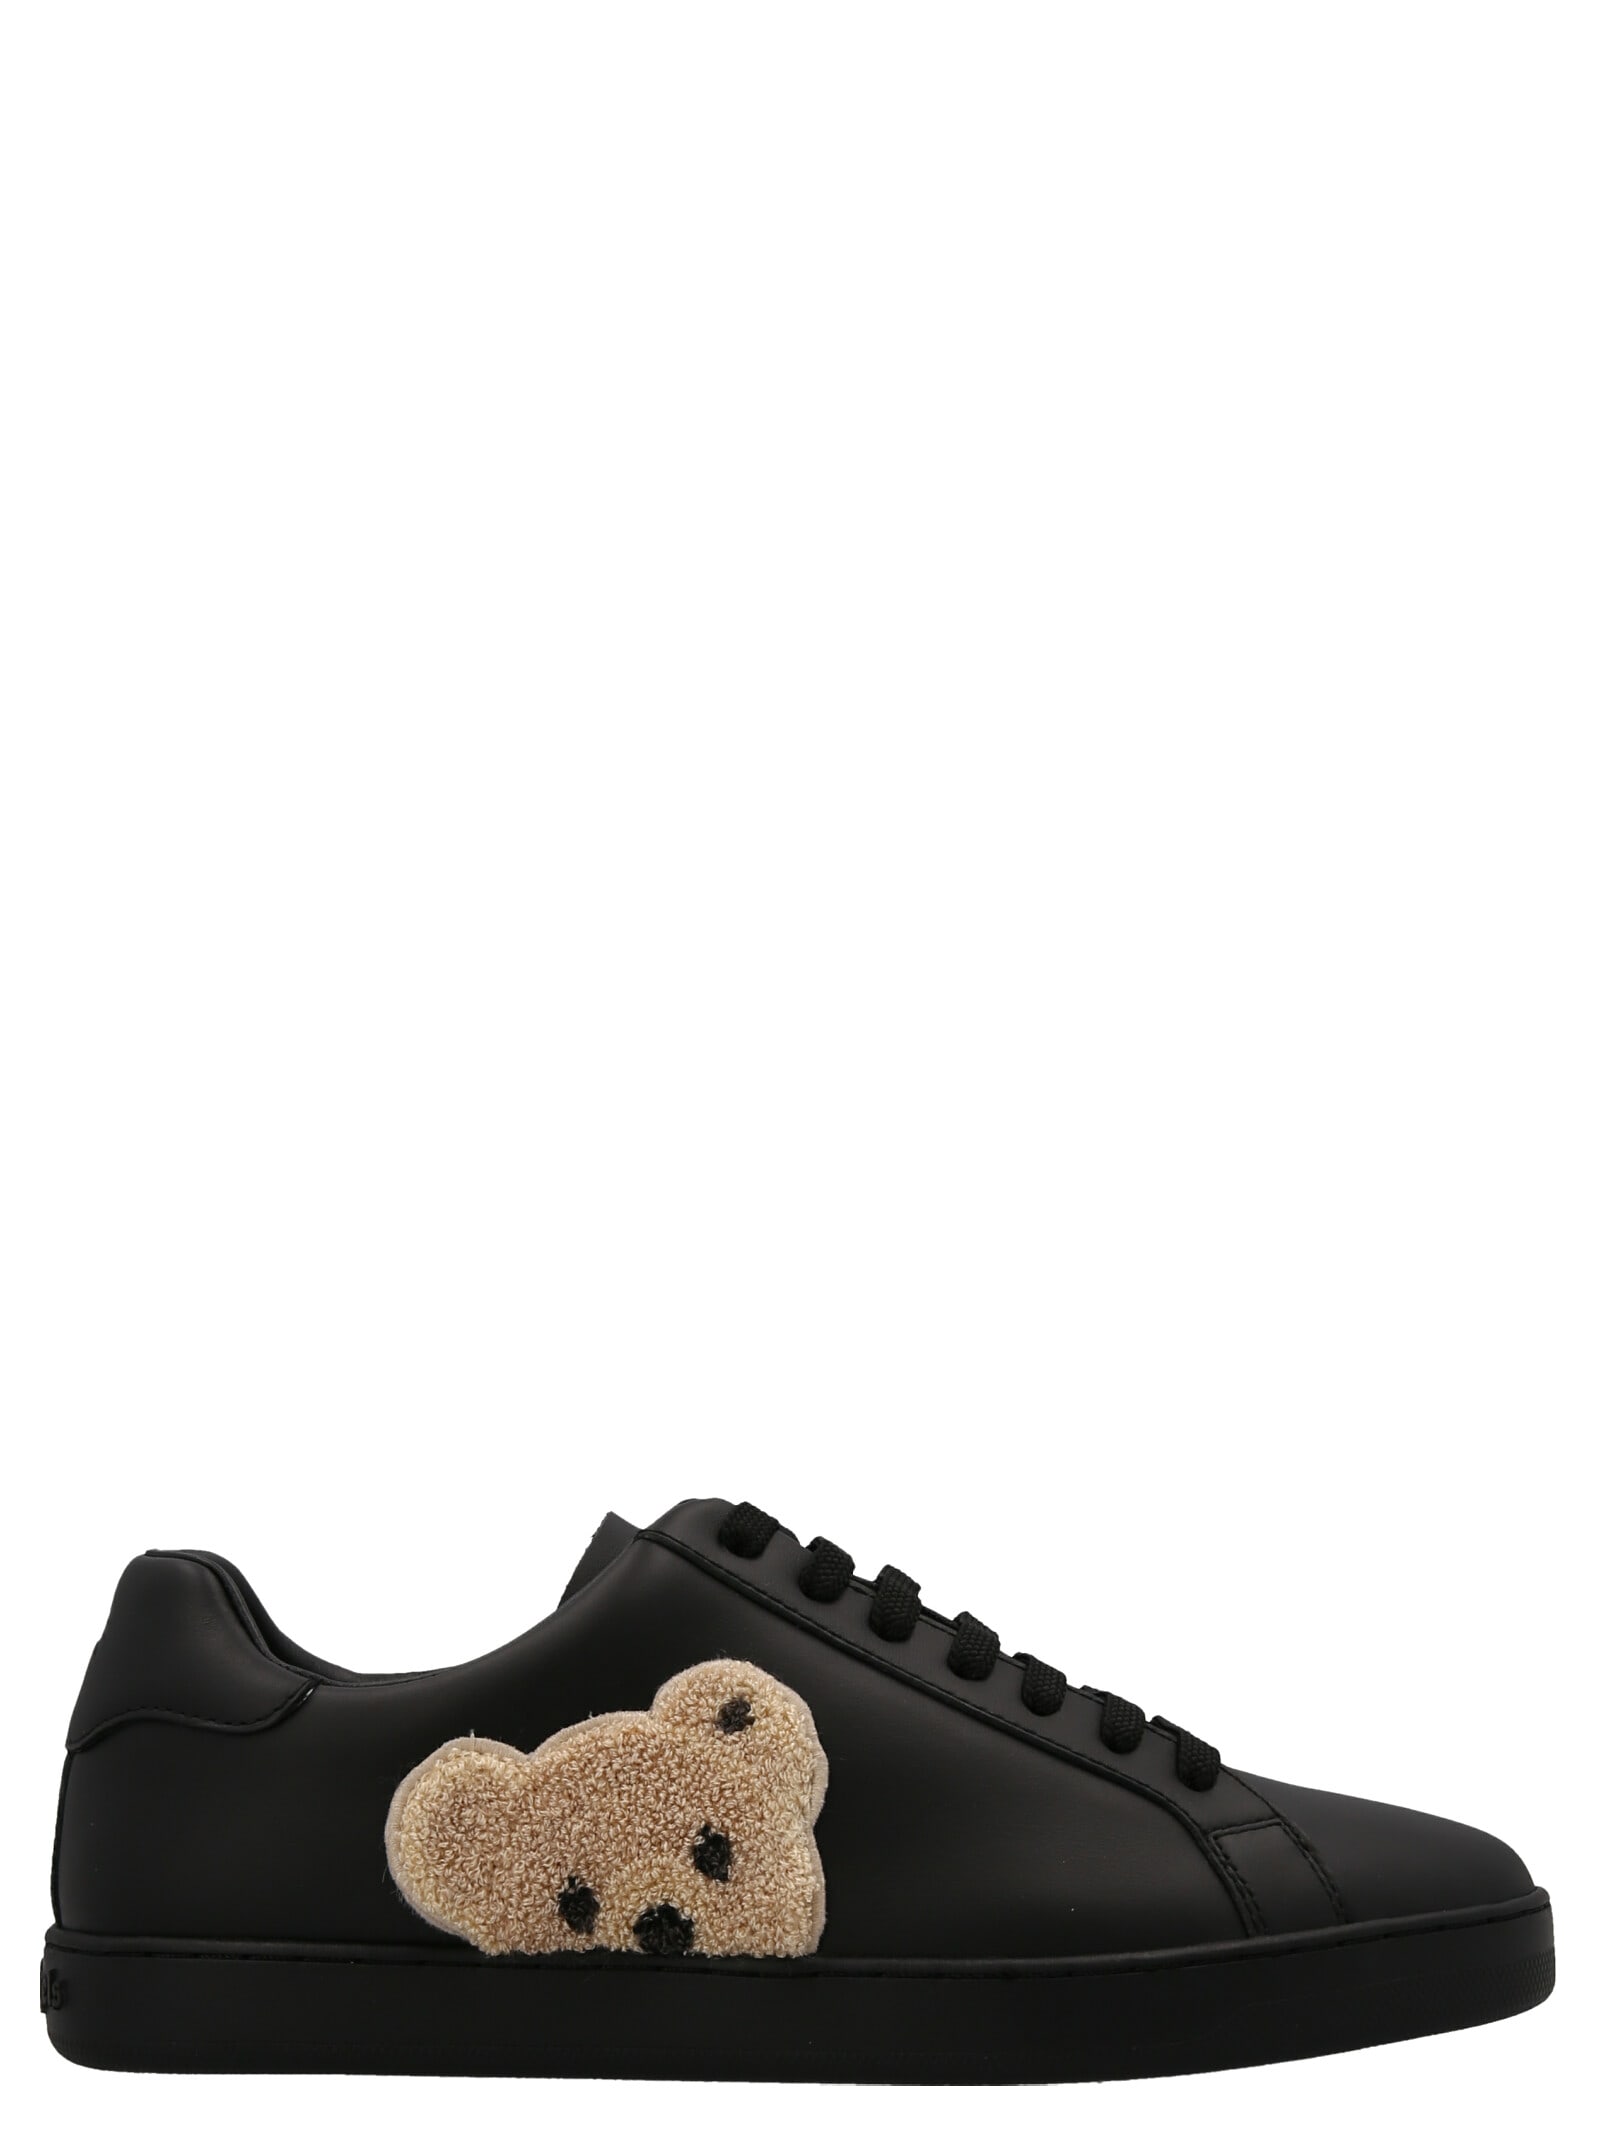 Palm Angels new Teddy Bear Sneakers